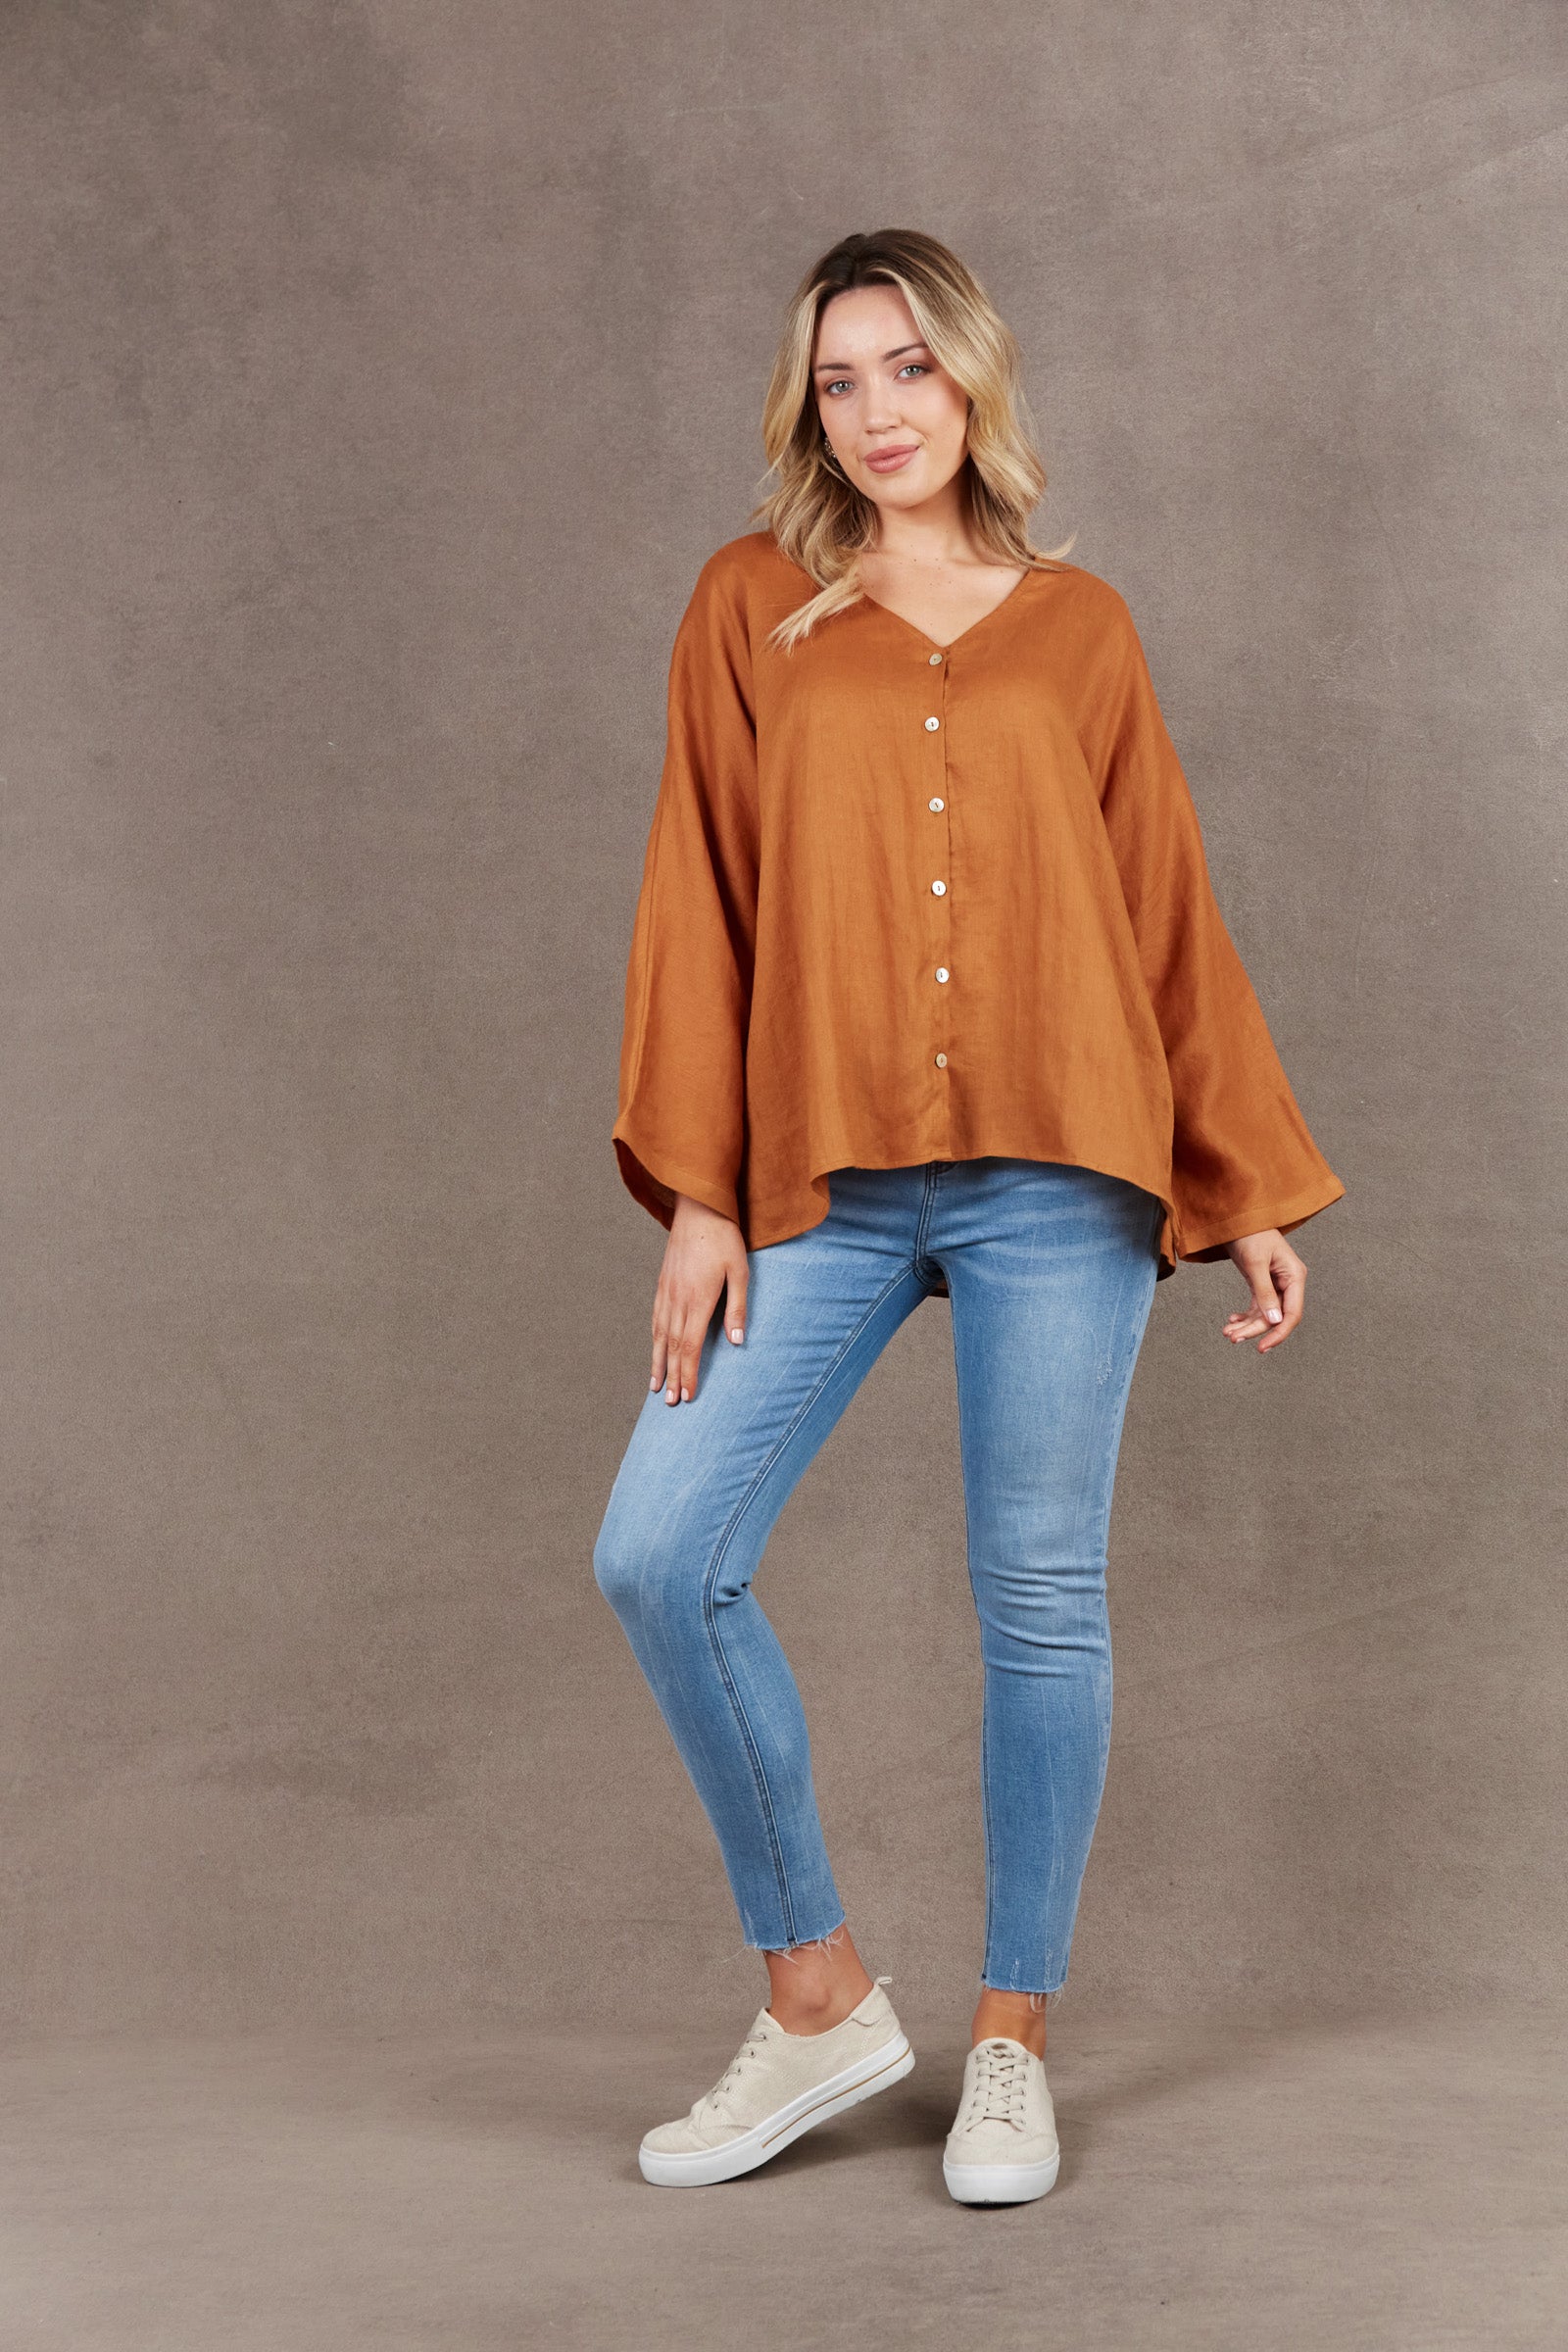 Nama Relax Top - Ochre - eb&ive Clothing - Top L/S Linen One Size